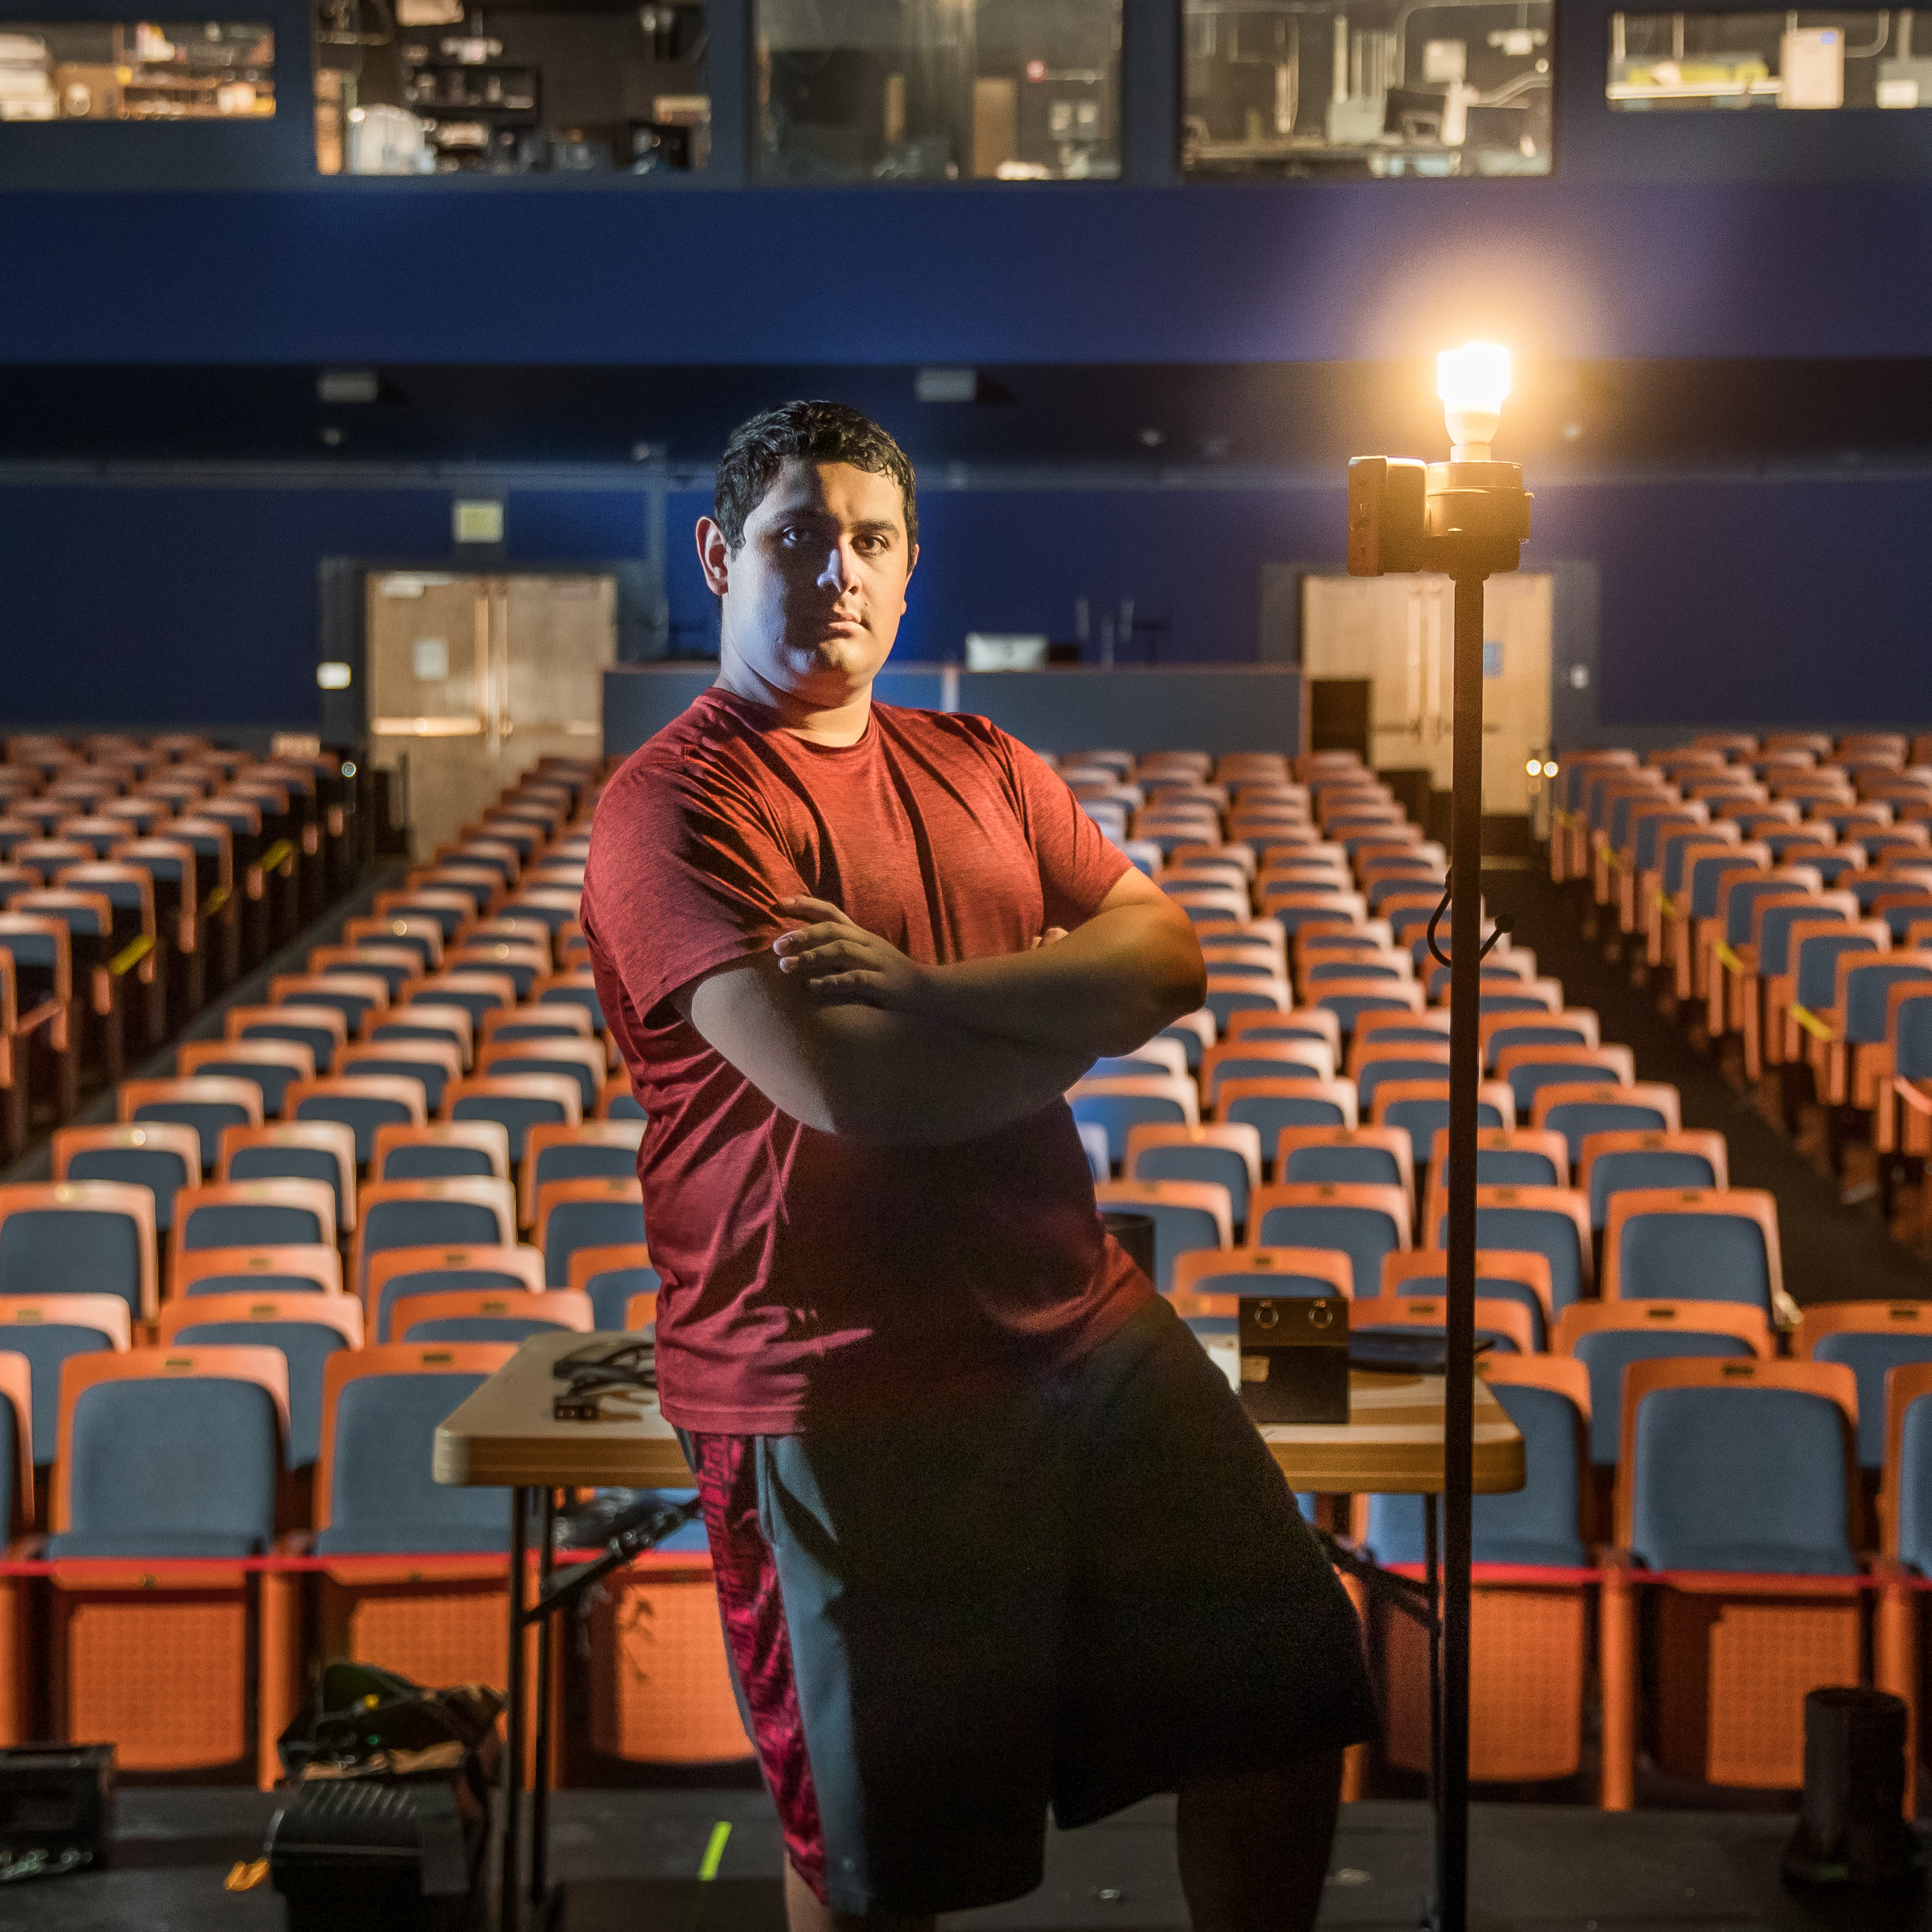 Theatre student Arteaga stands on stage before empty theater